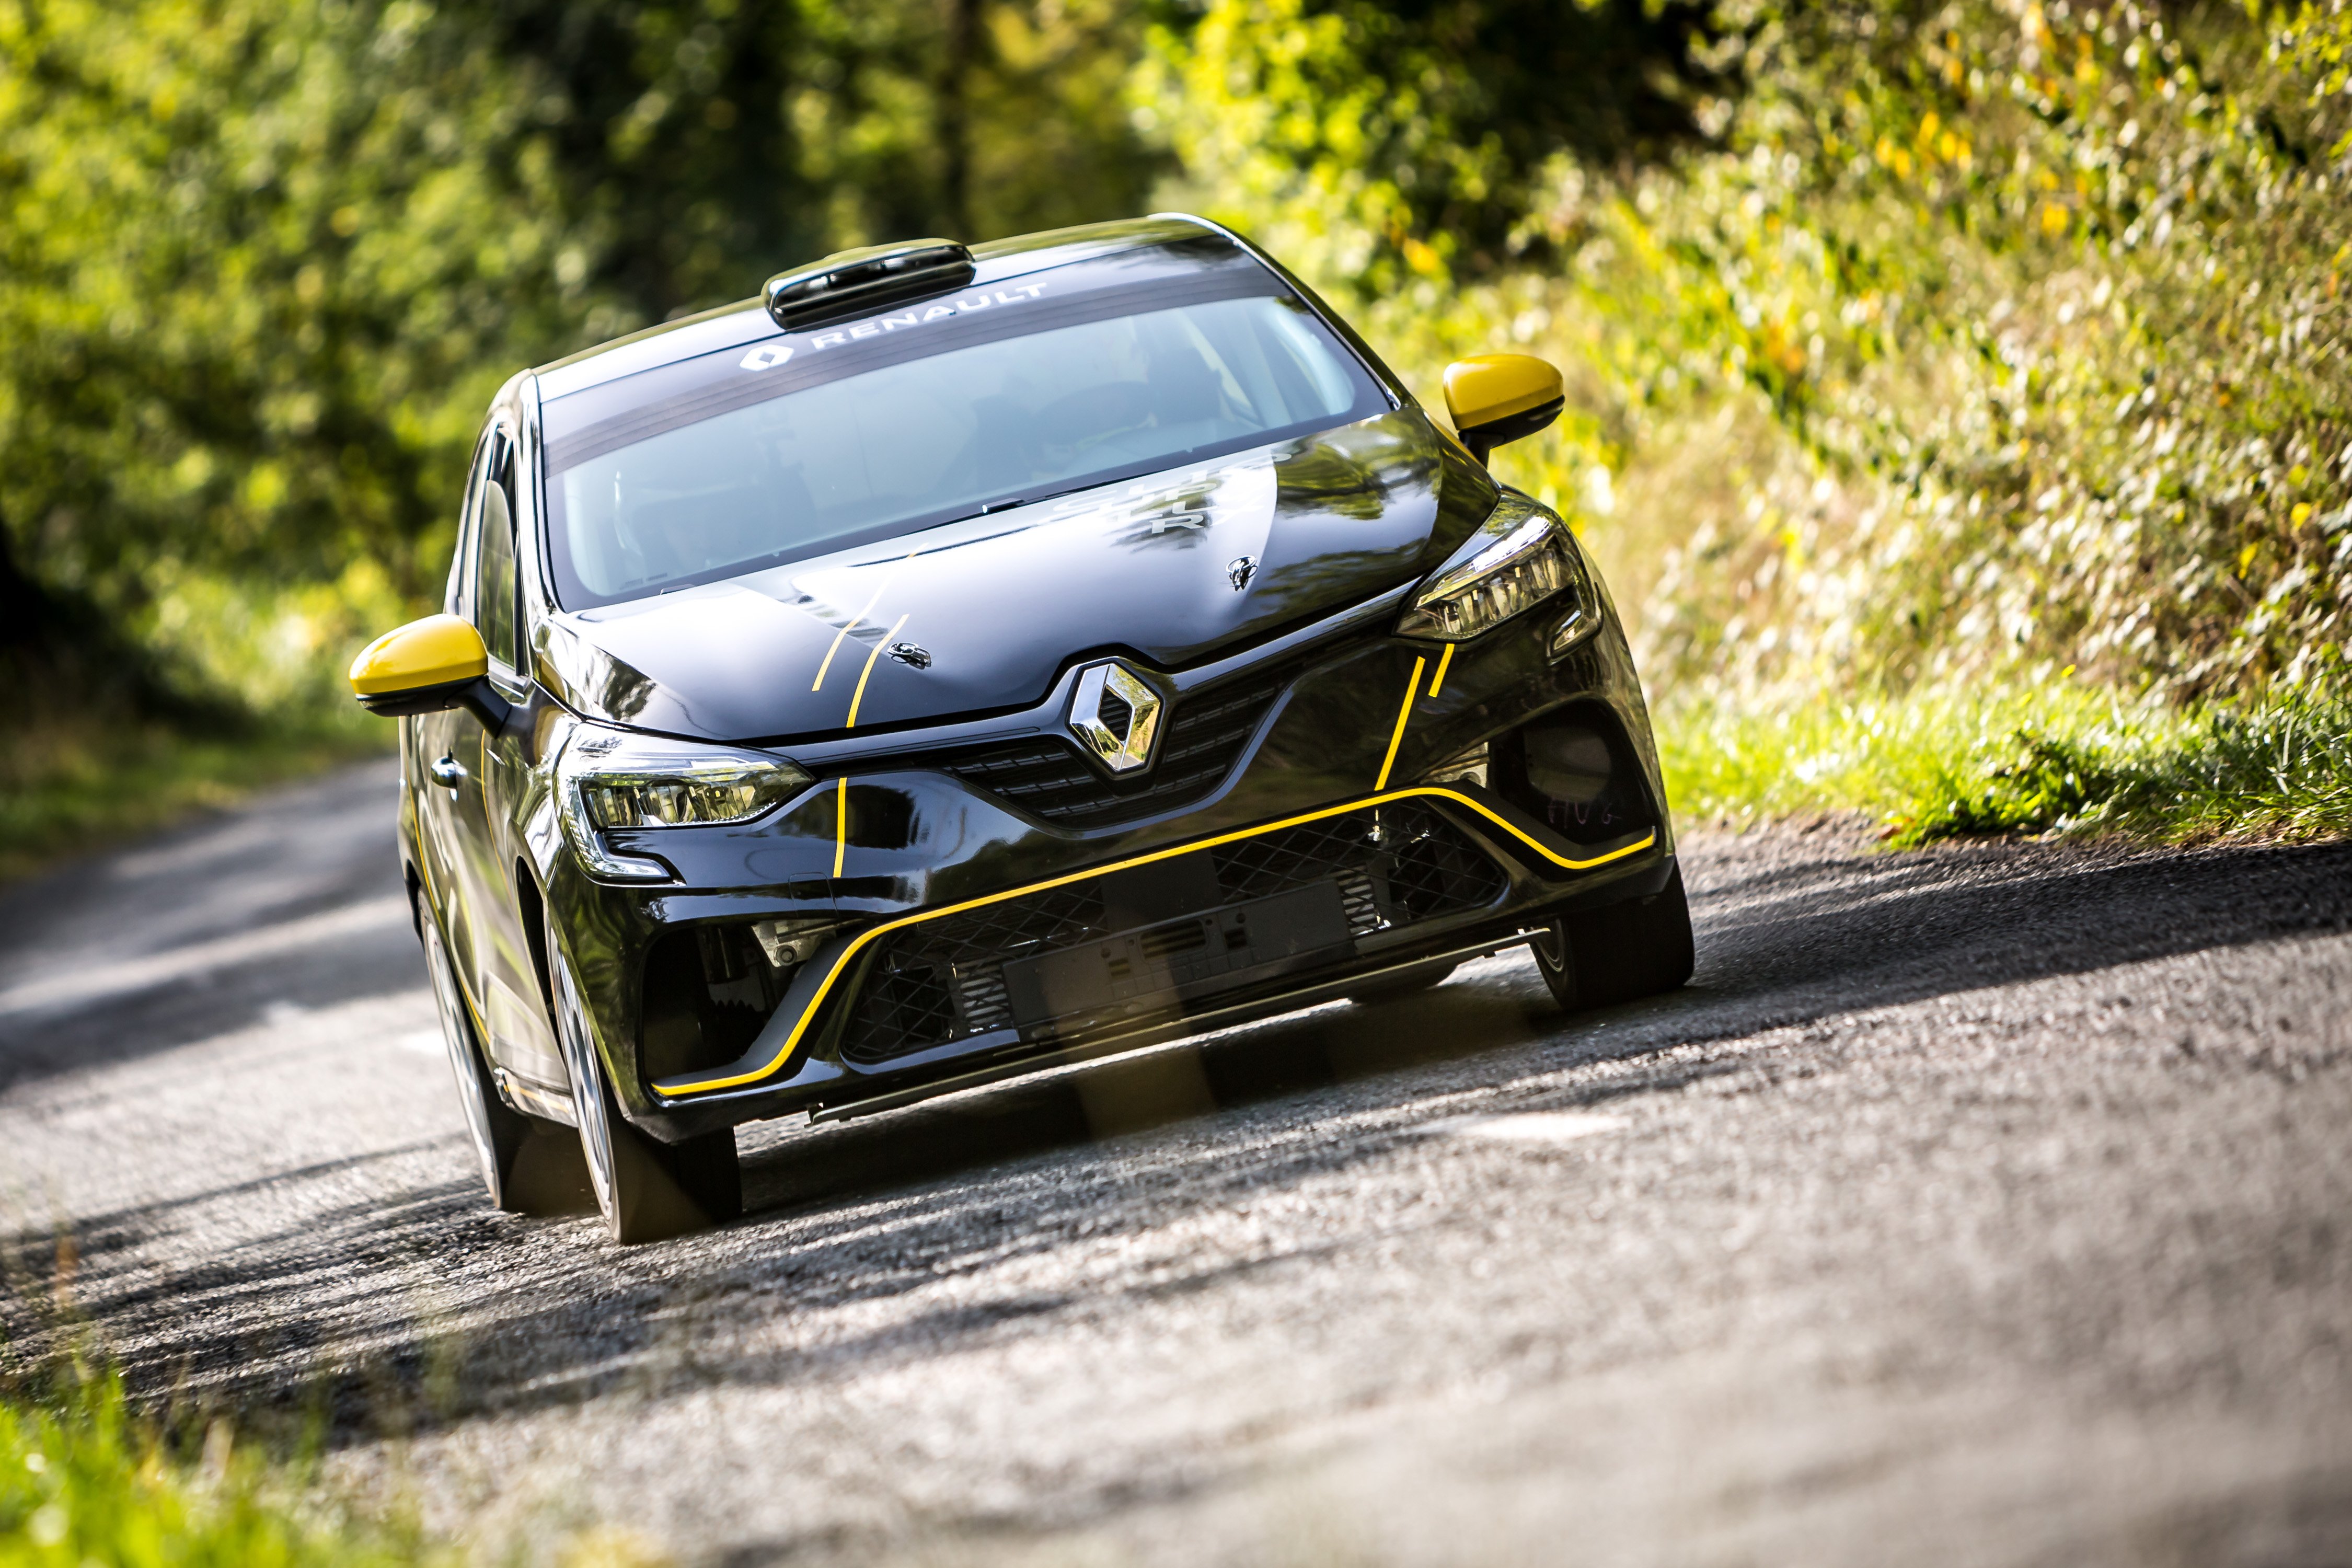 Rally facts: debut of Renault Clio Rally5